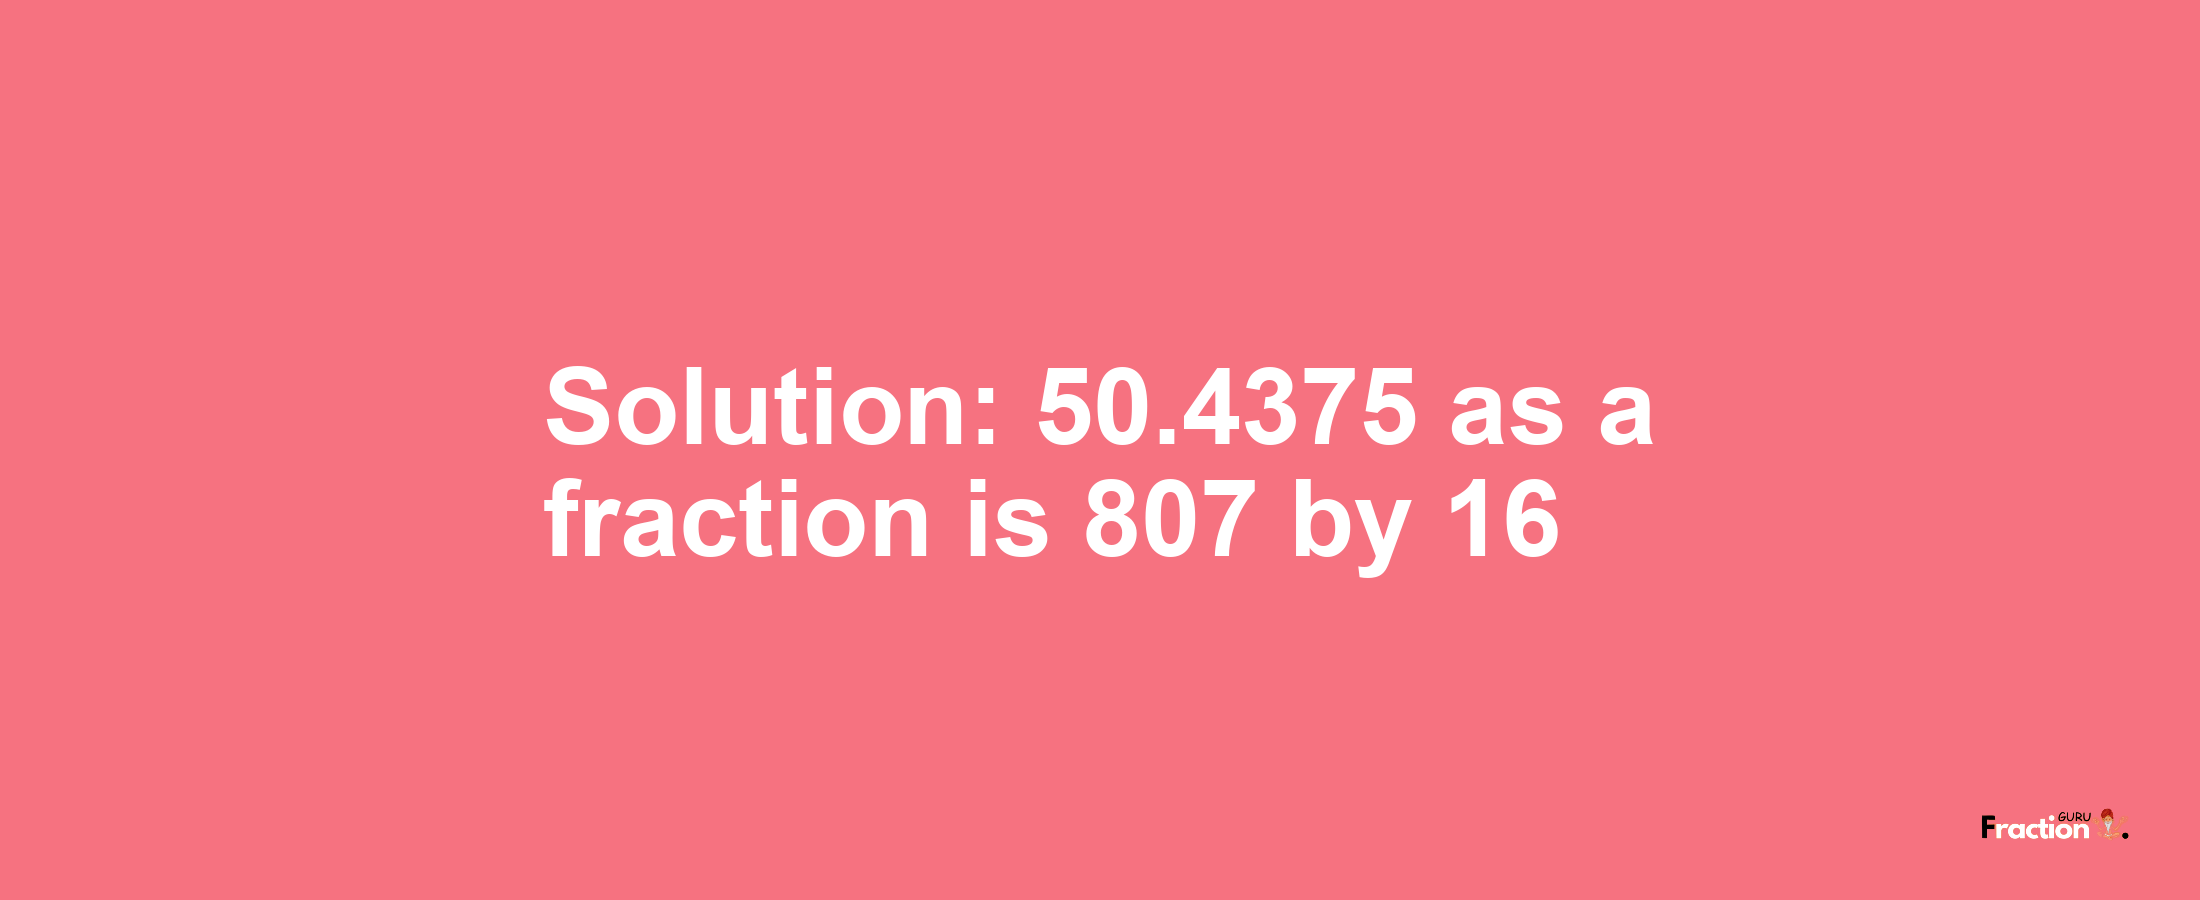 Solution:50.4375 as a fraction is 807/16